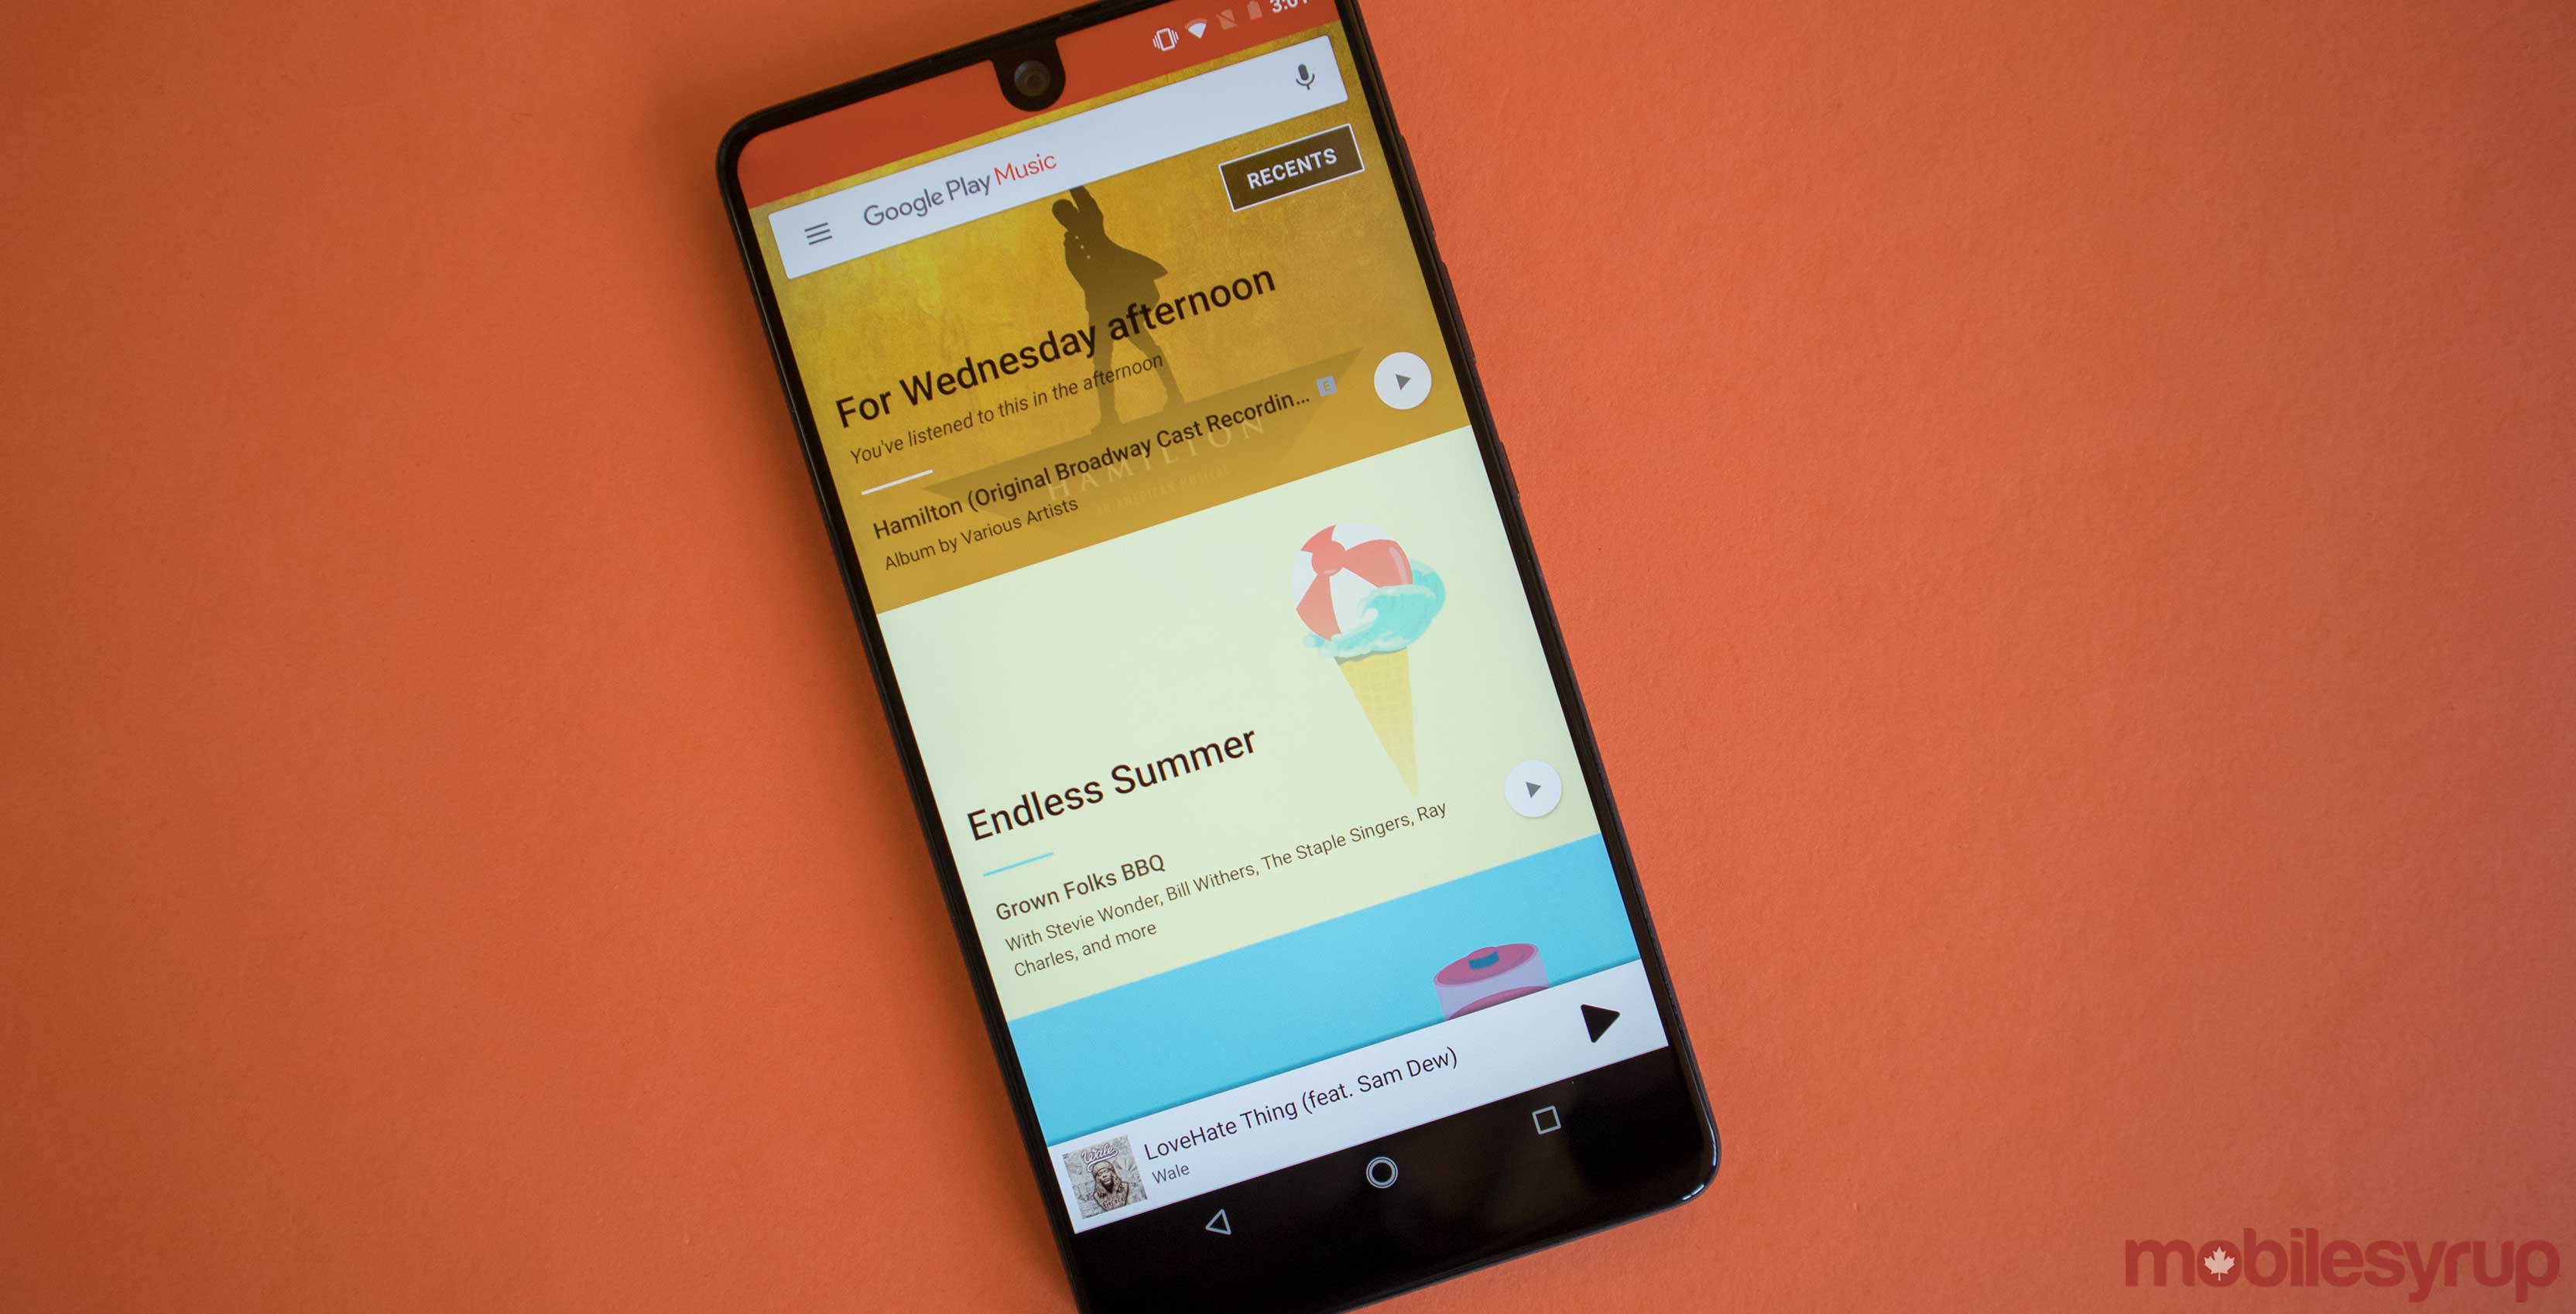 Google is slowly tearing down Google Play Music's services